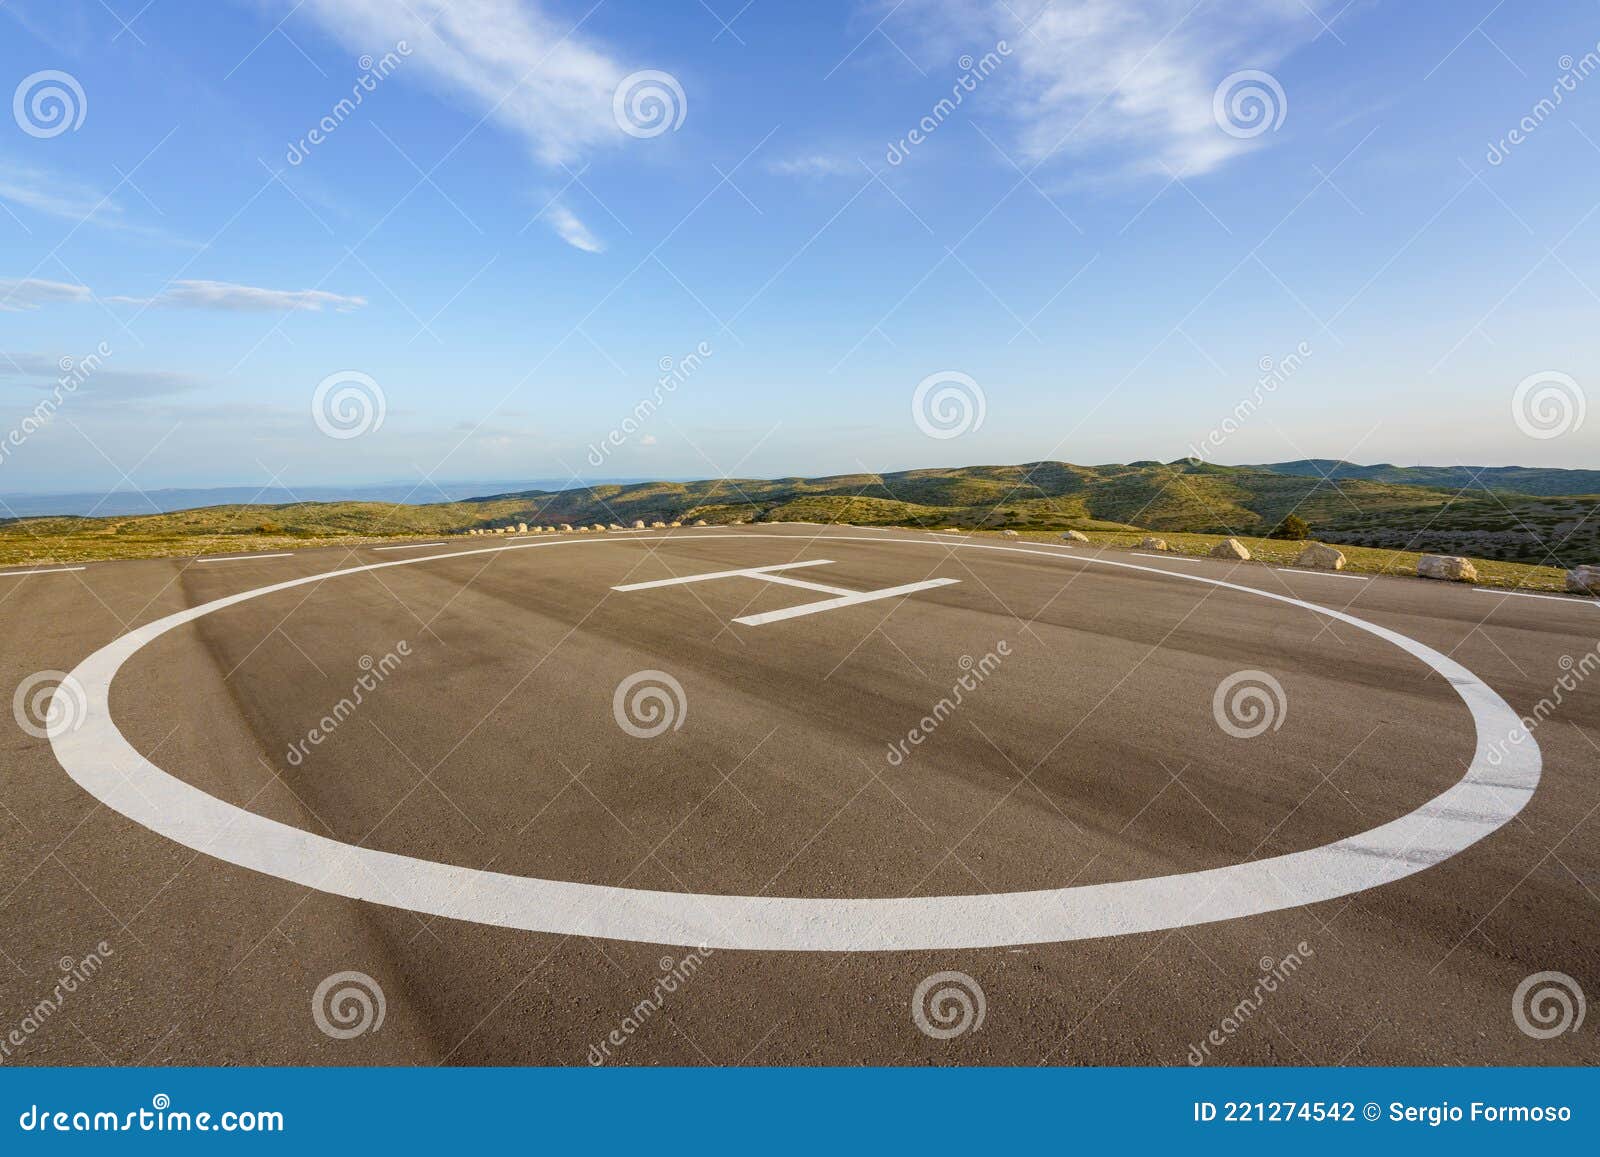 empty helipad on top of a peak in a countryside remote location